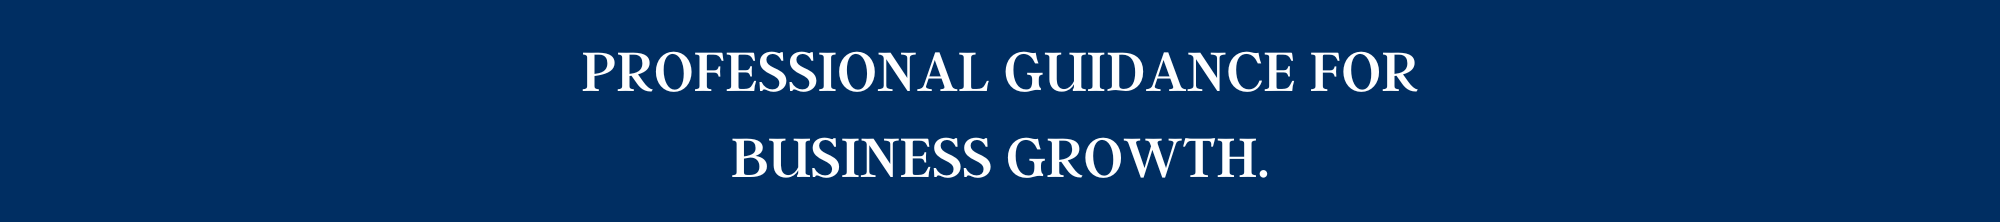 Professional Guidance for Business Growth Growth 